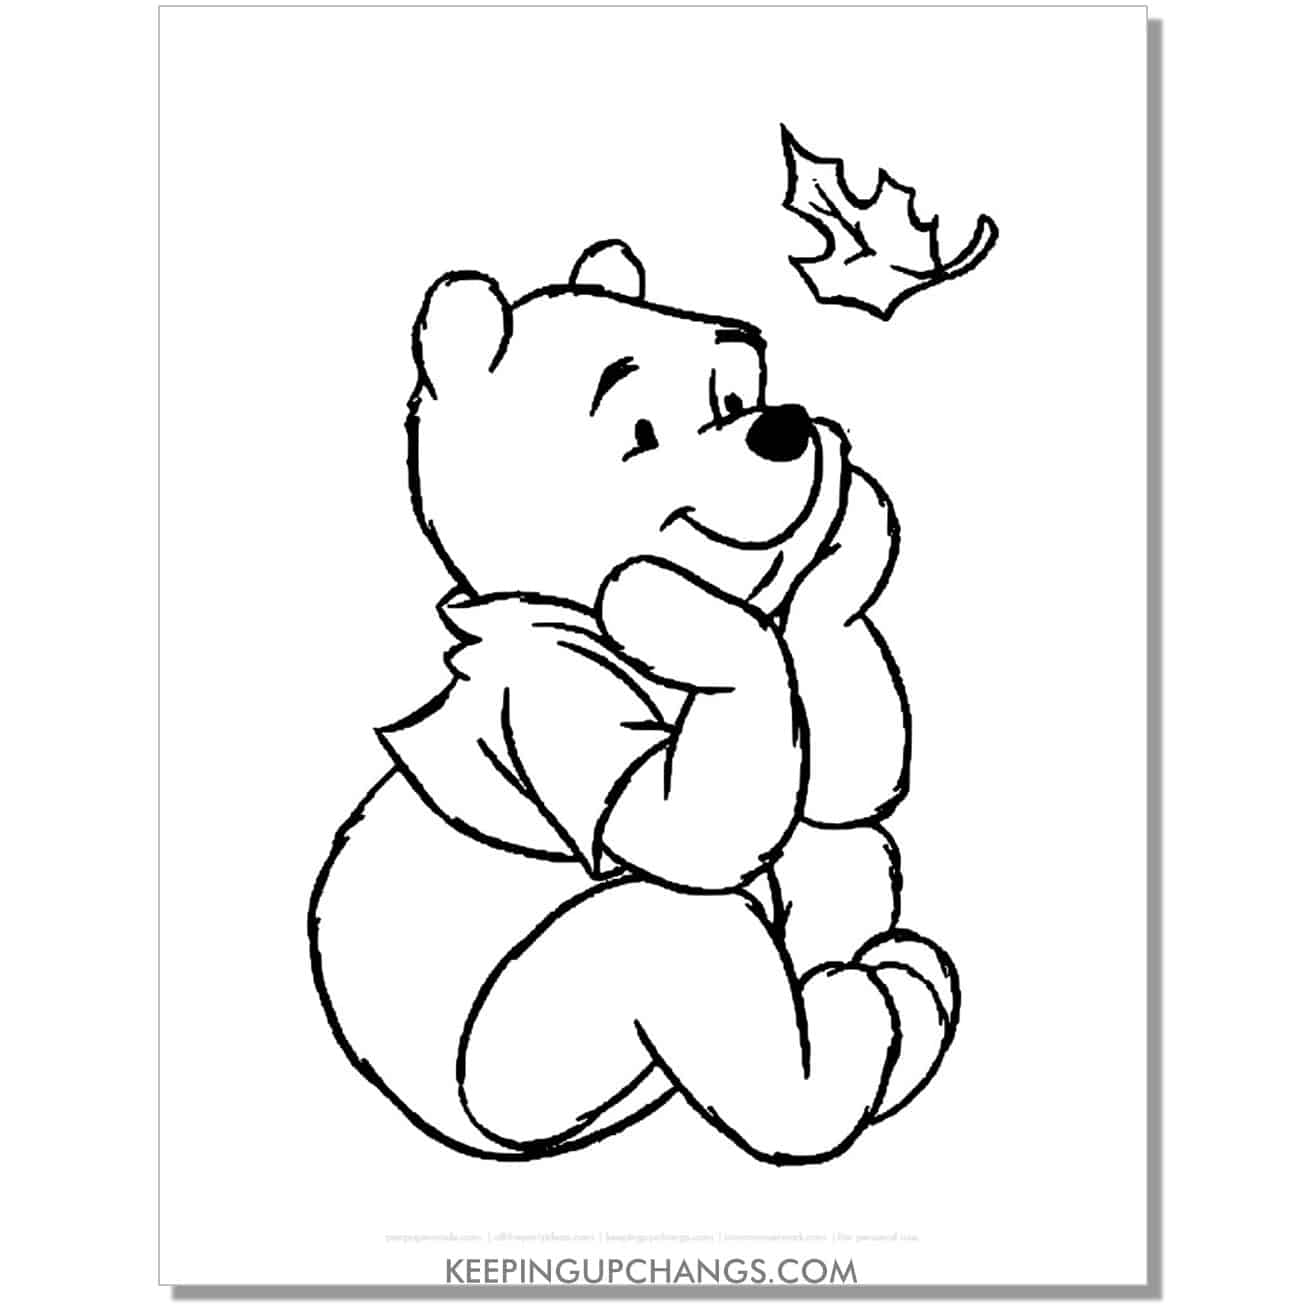 winnie the pooh looking at falling leaf coloring page, sheet.